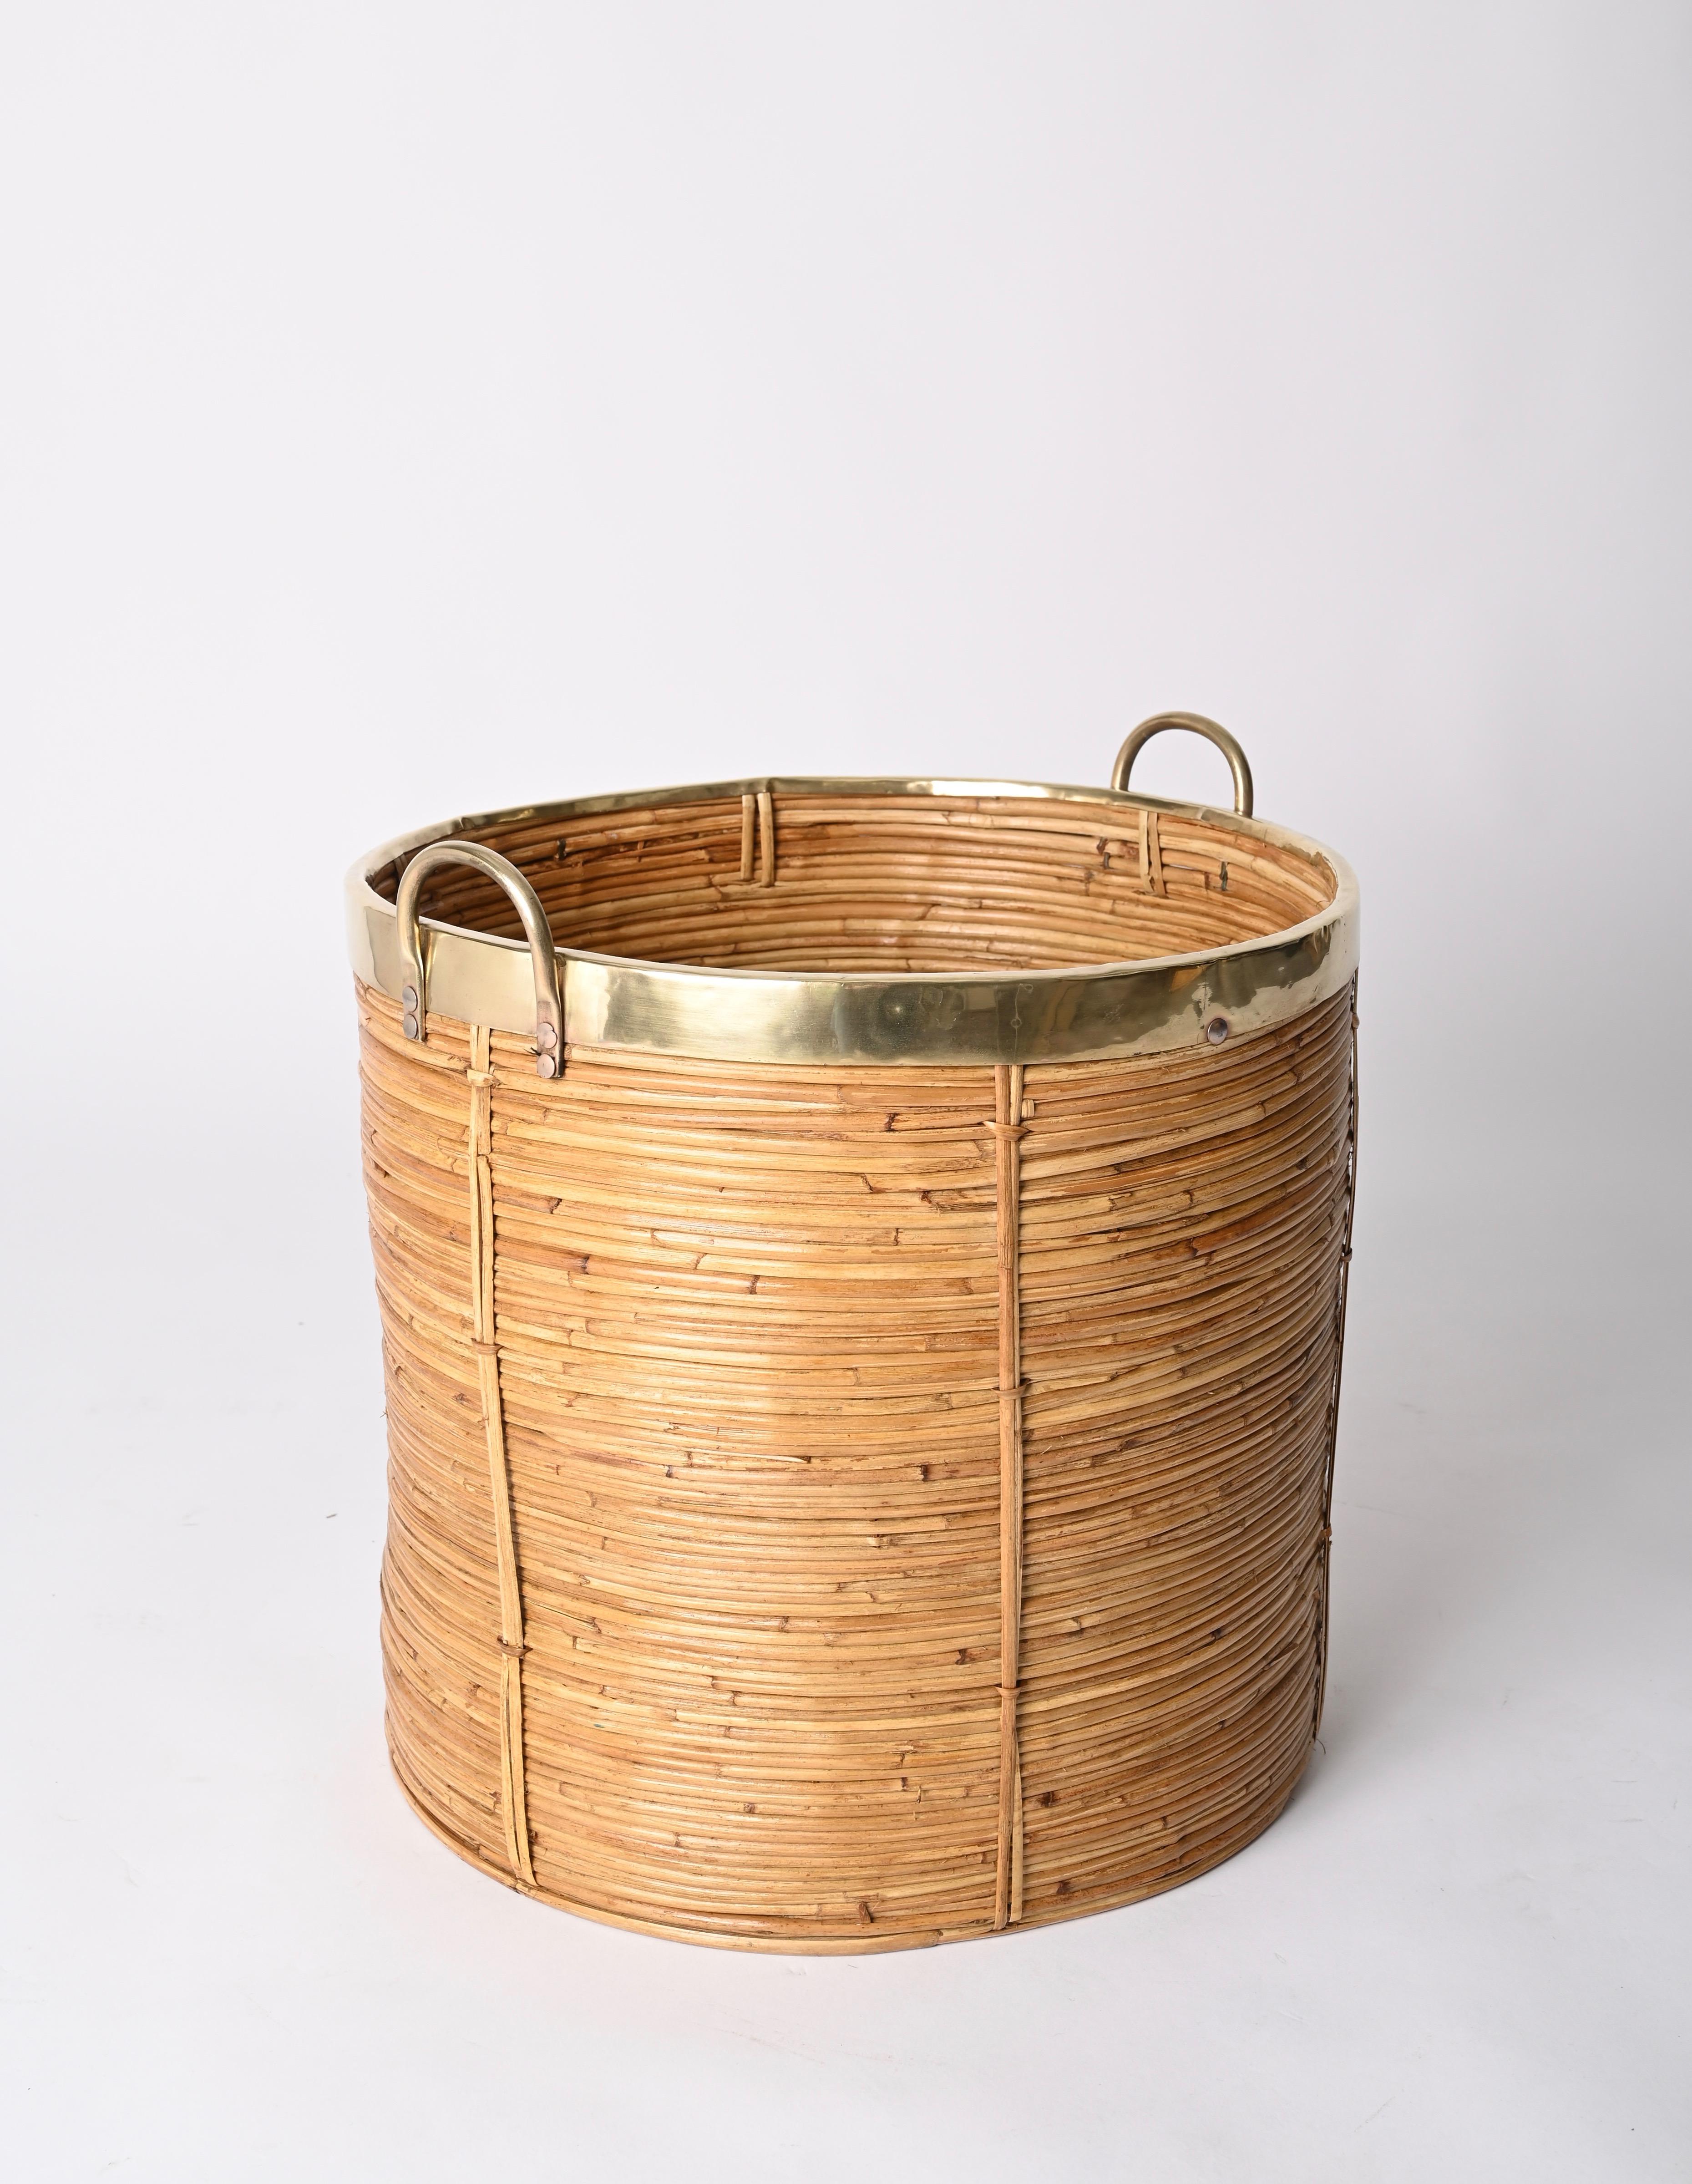 Italian Midcentury Curved Rattan, Brass and Wicker Basket, Vivai del Sud, Italy 1970s For Sale